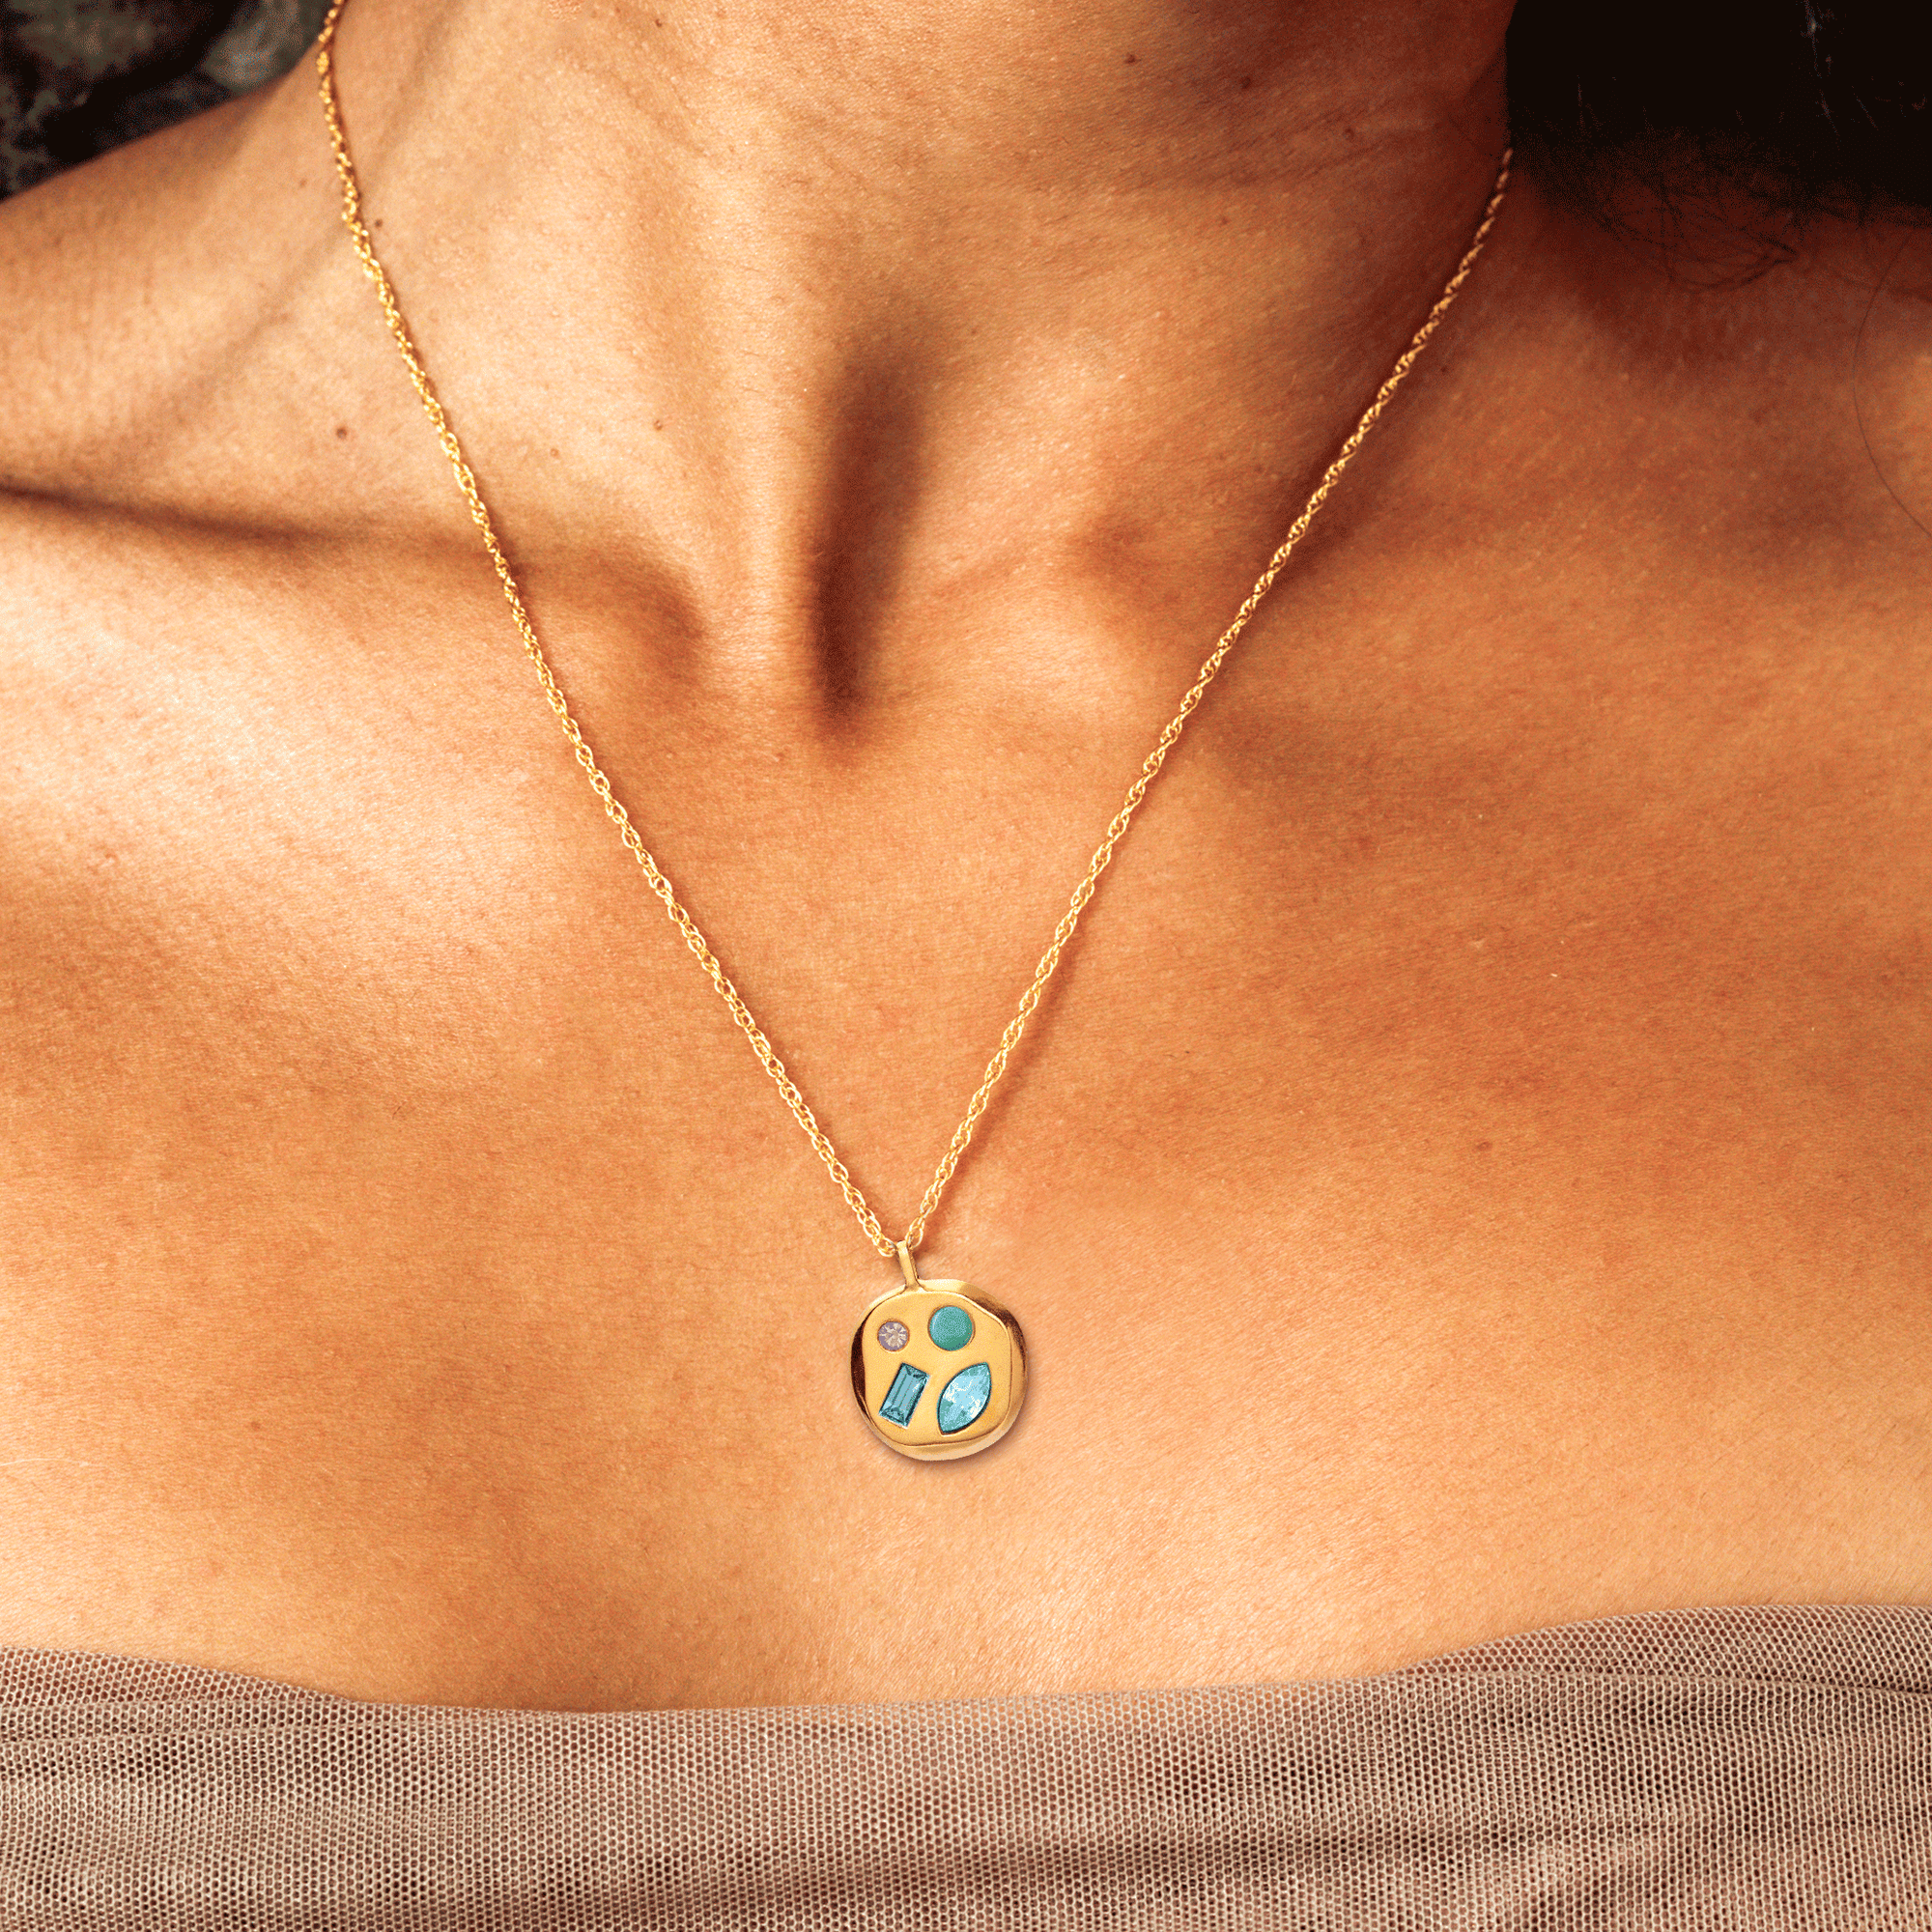 Person wearing The December Seventh Pendant